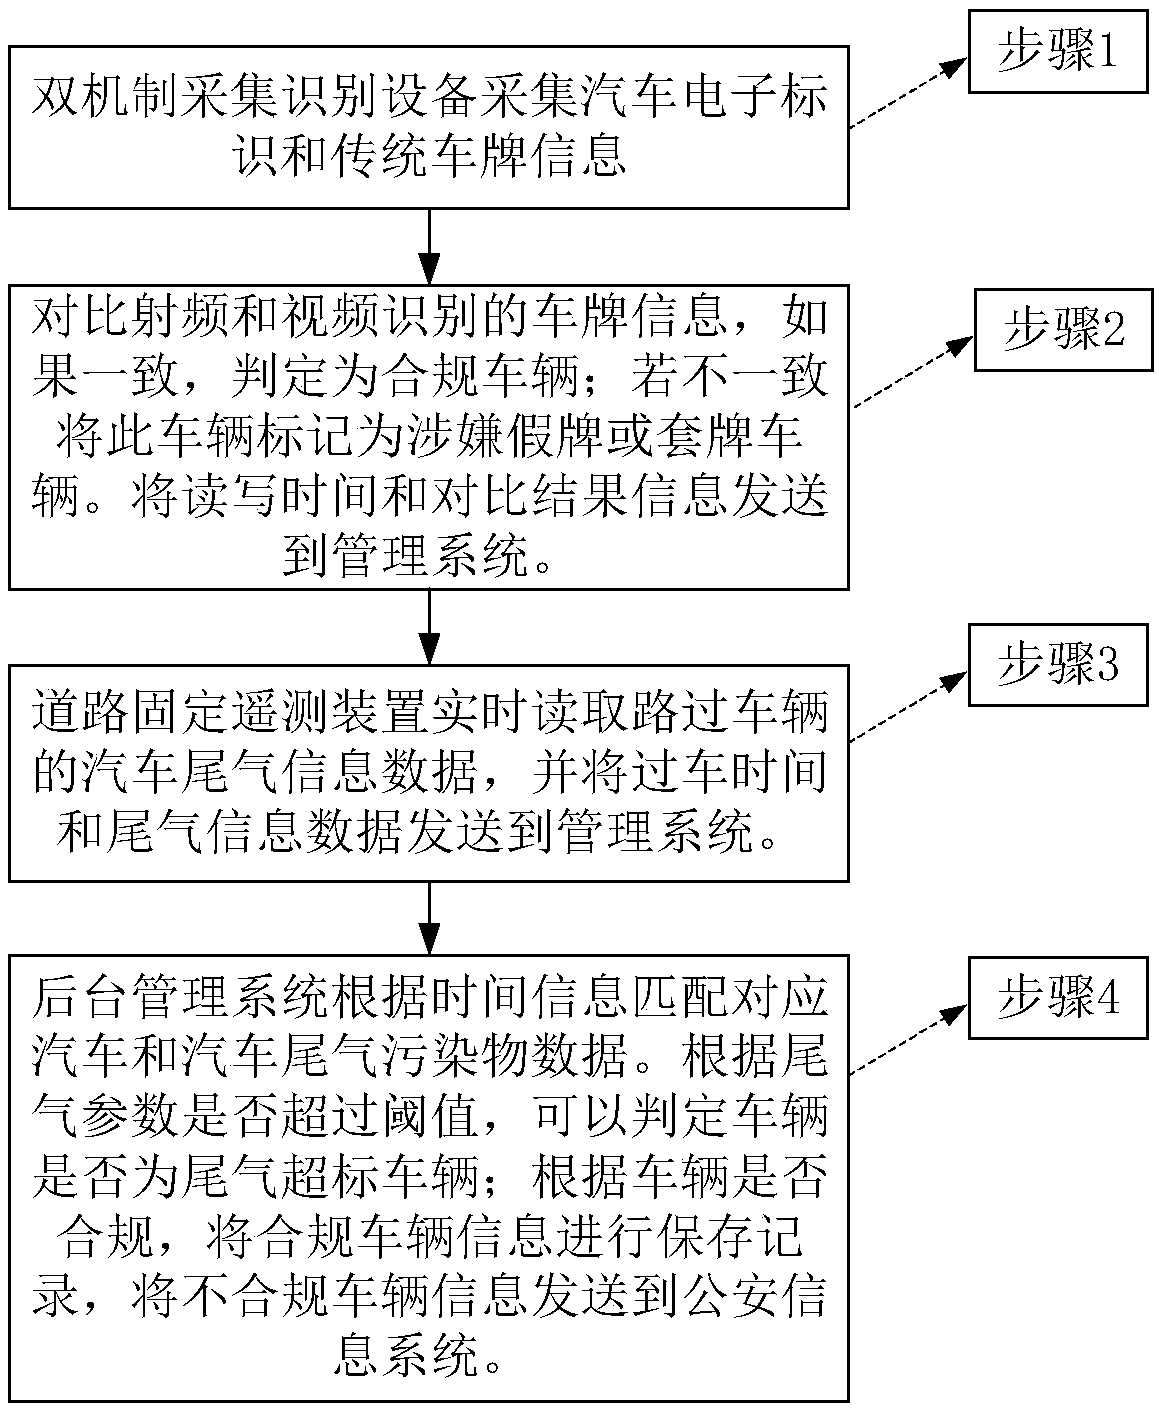 Automobile exhaust pollutant monitoring method integrating automobile electronic identifier and video